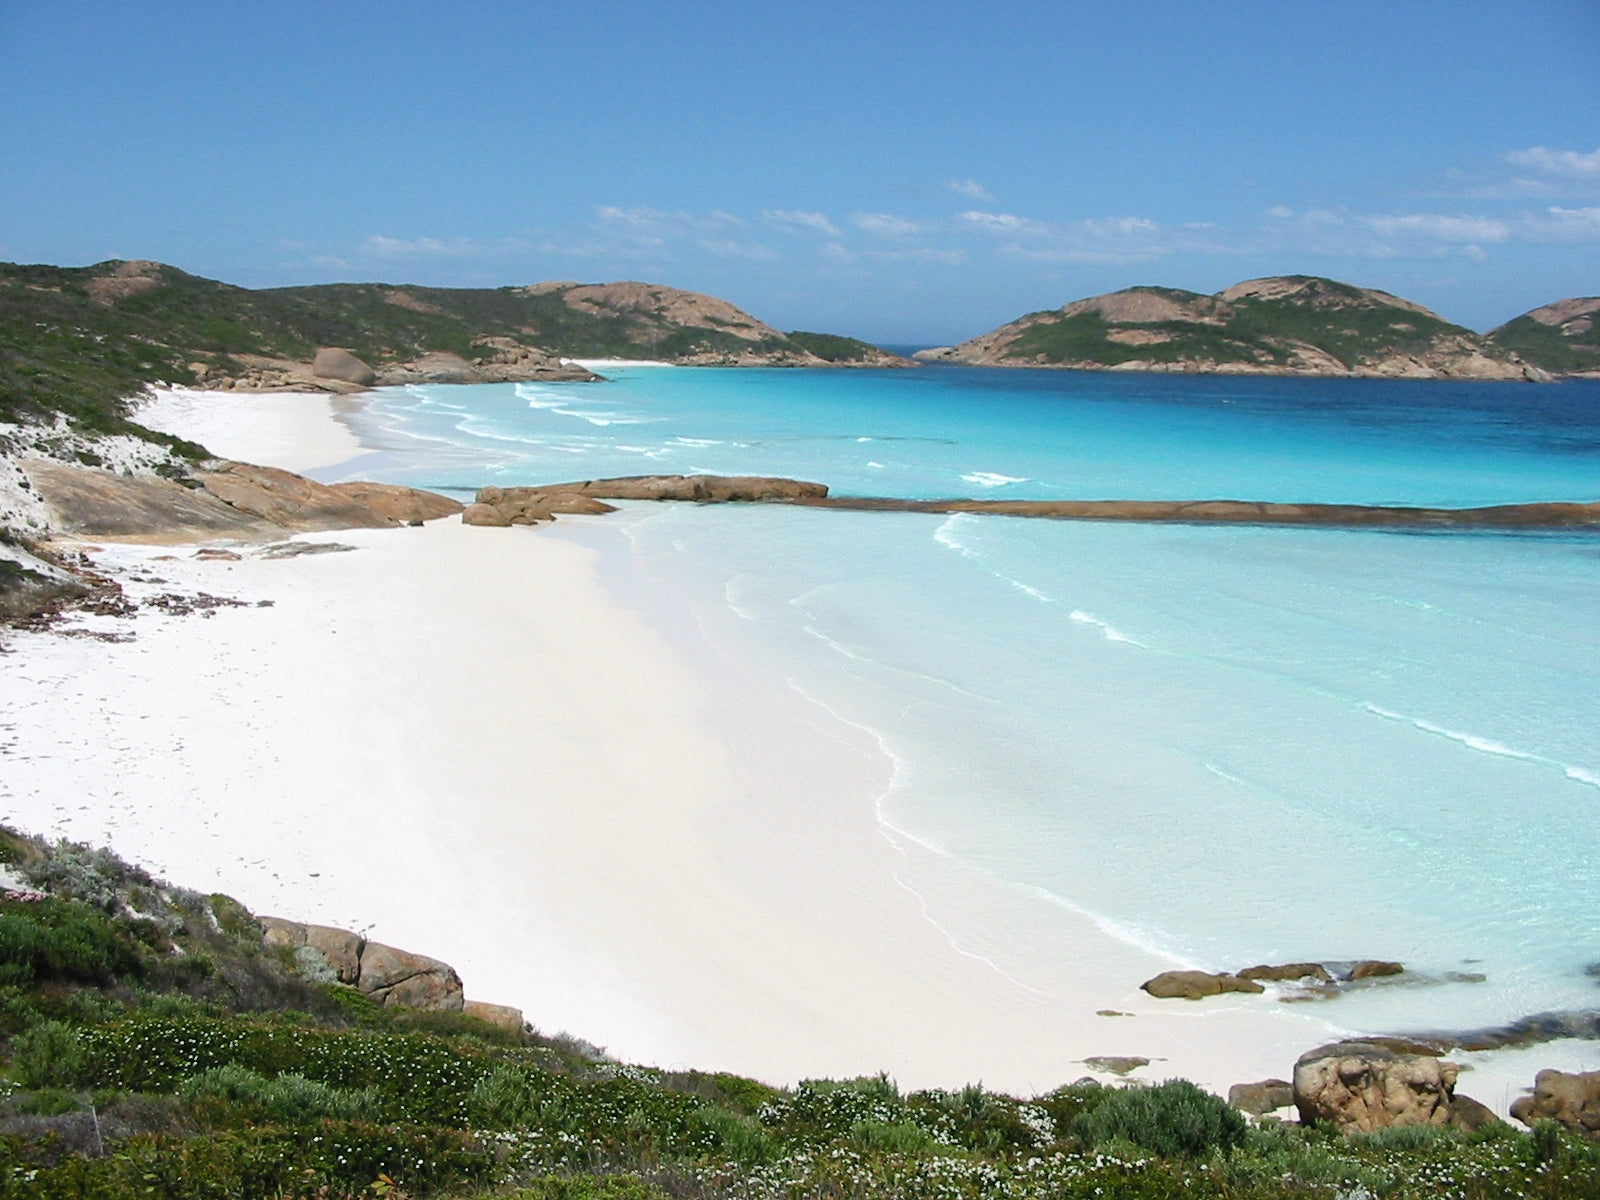 Lucky winner: why this beach in WA claims the crown of Australia’s whitest sand